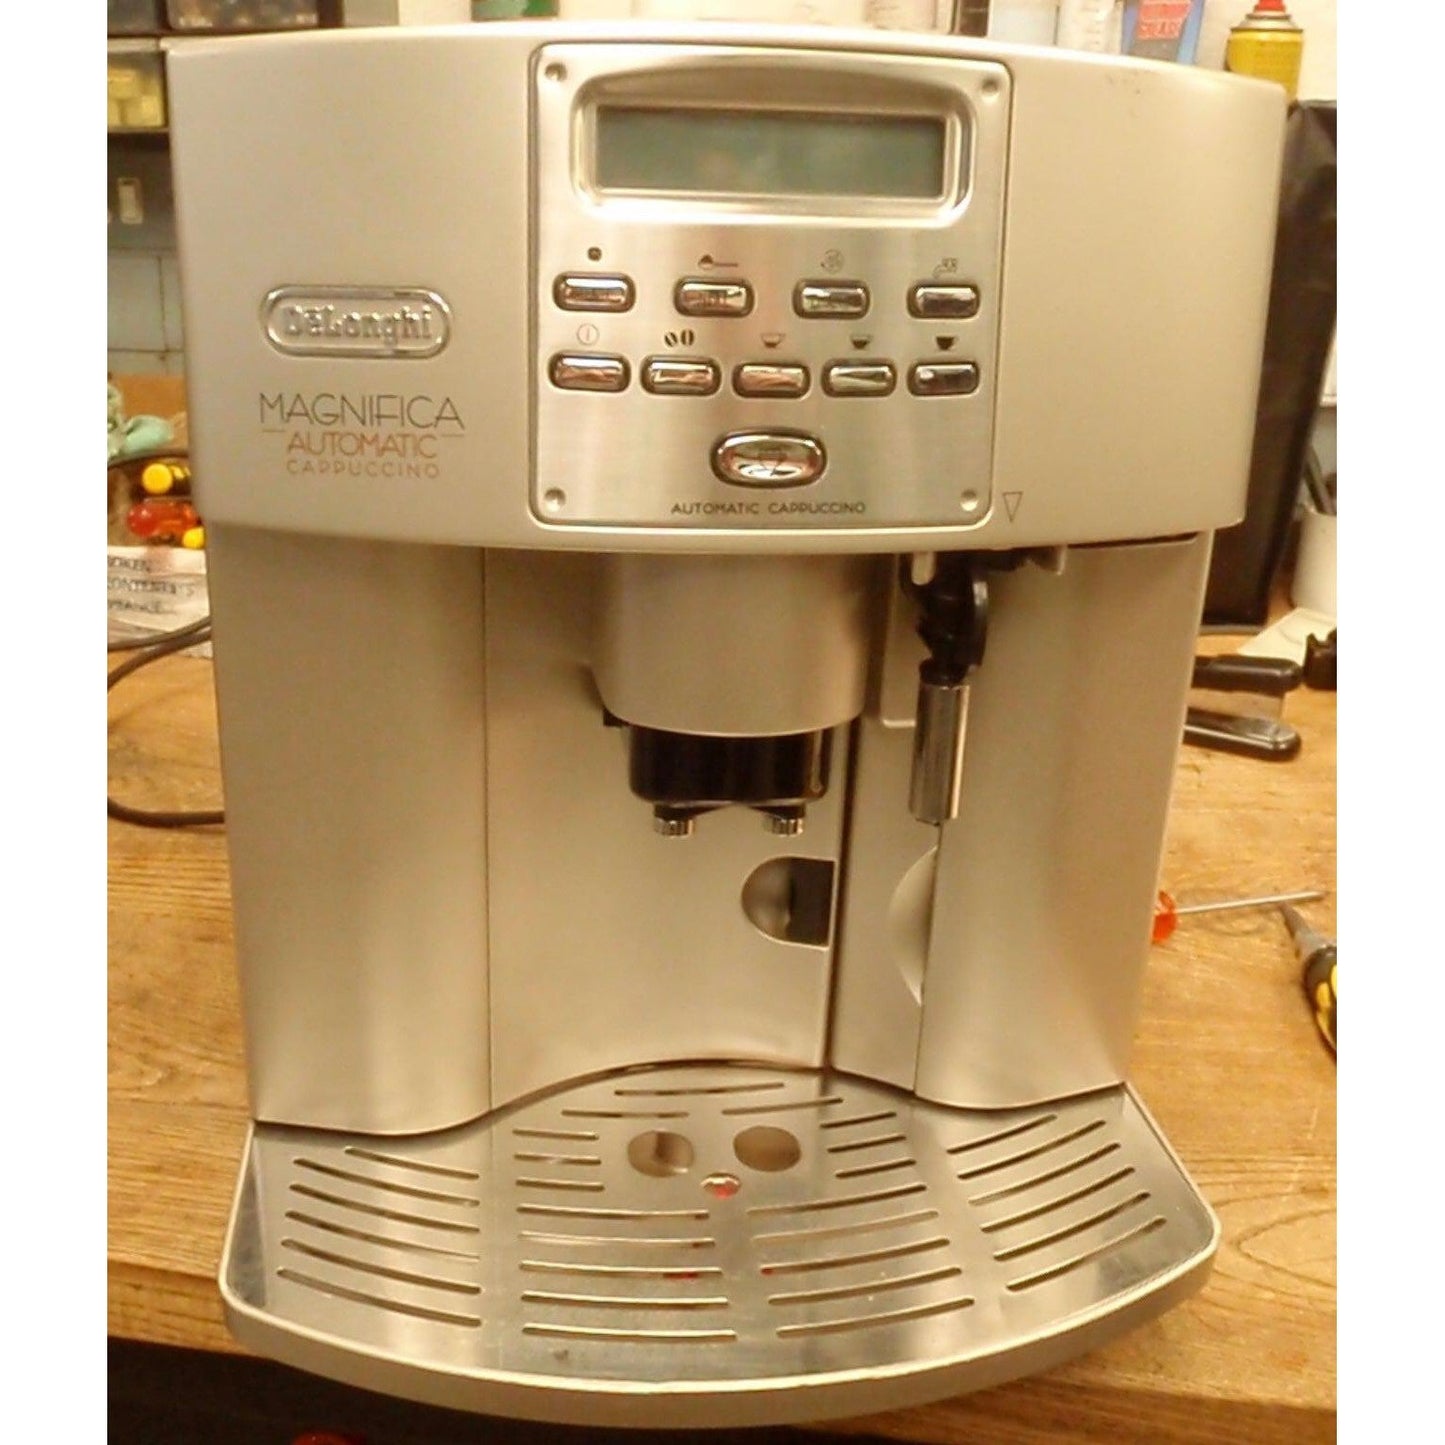 De'Longhi Magnifica Coffee Machine - 7300 Cup Count - PreLoved incl 3 months warranty